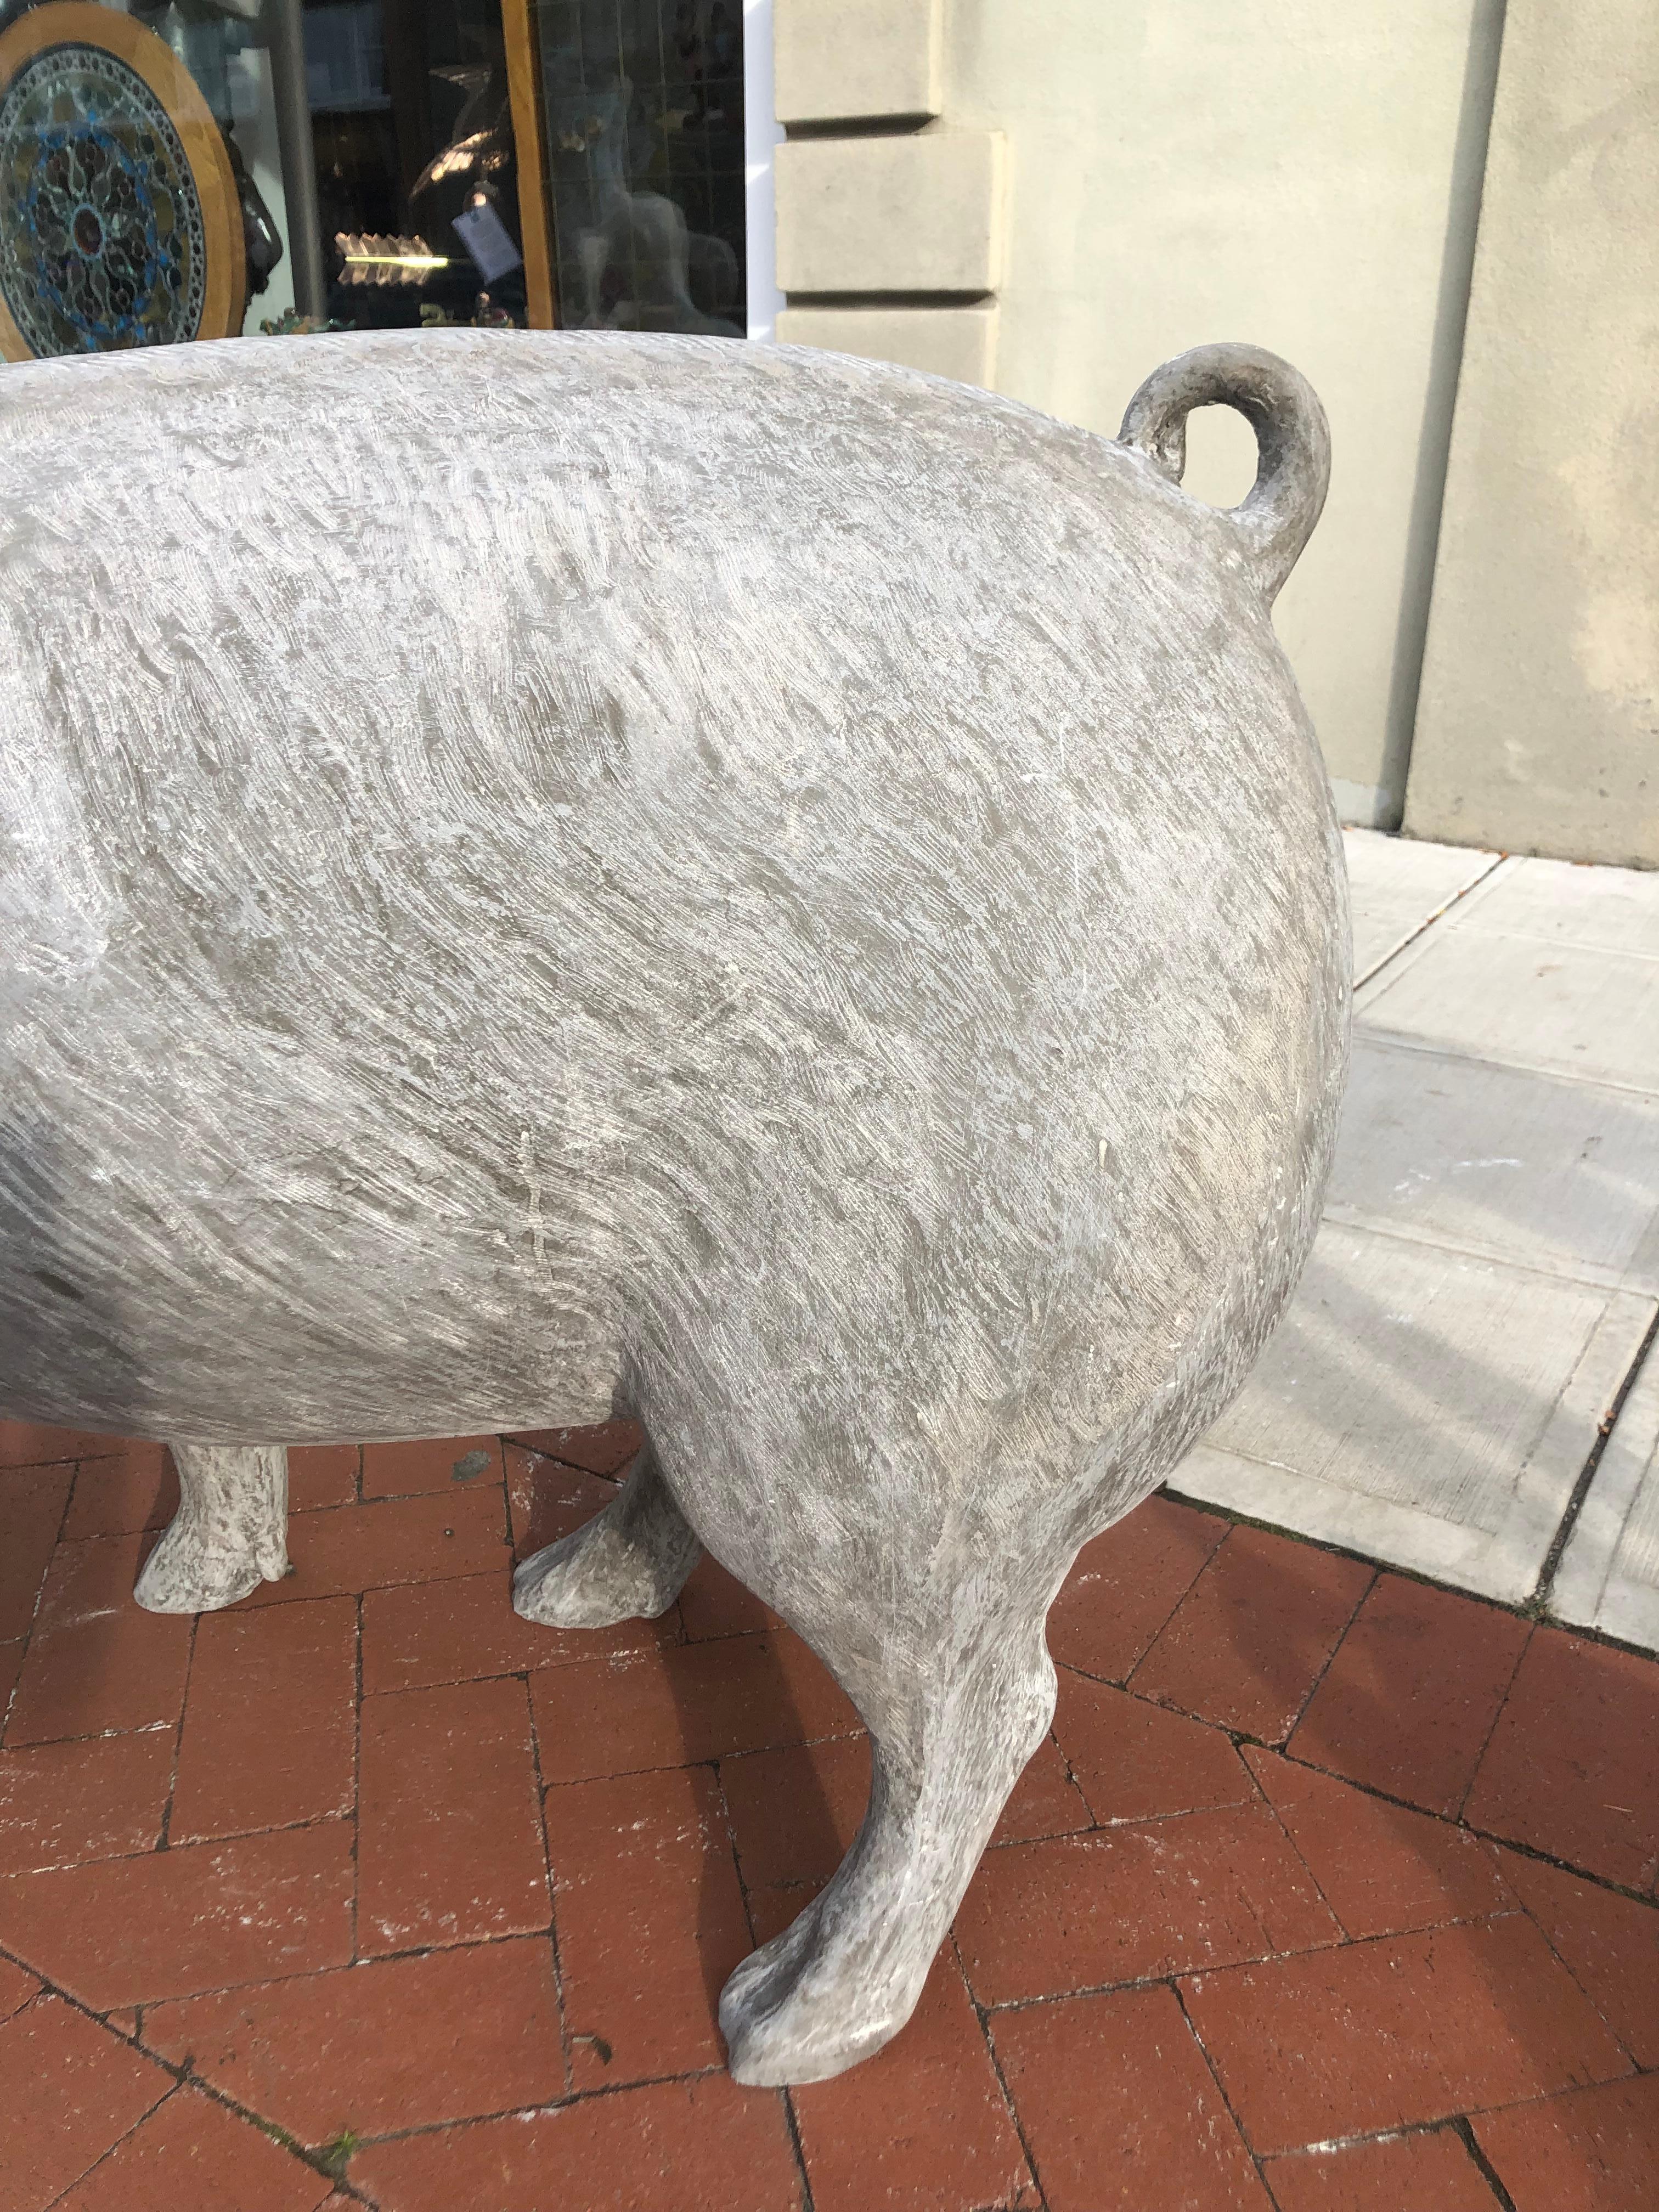 life size pig statue for sale